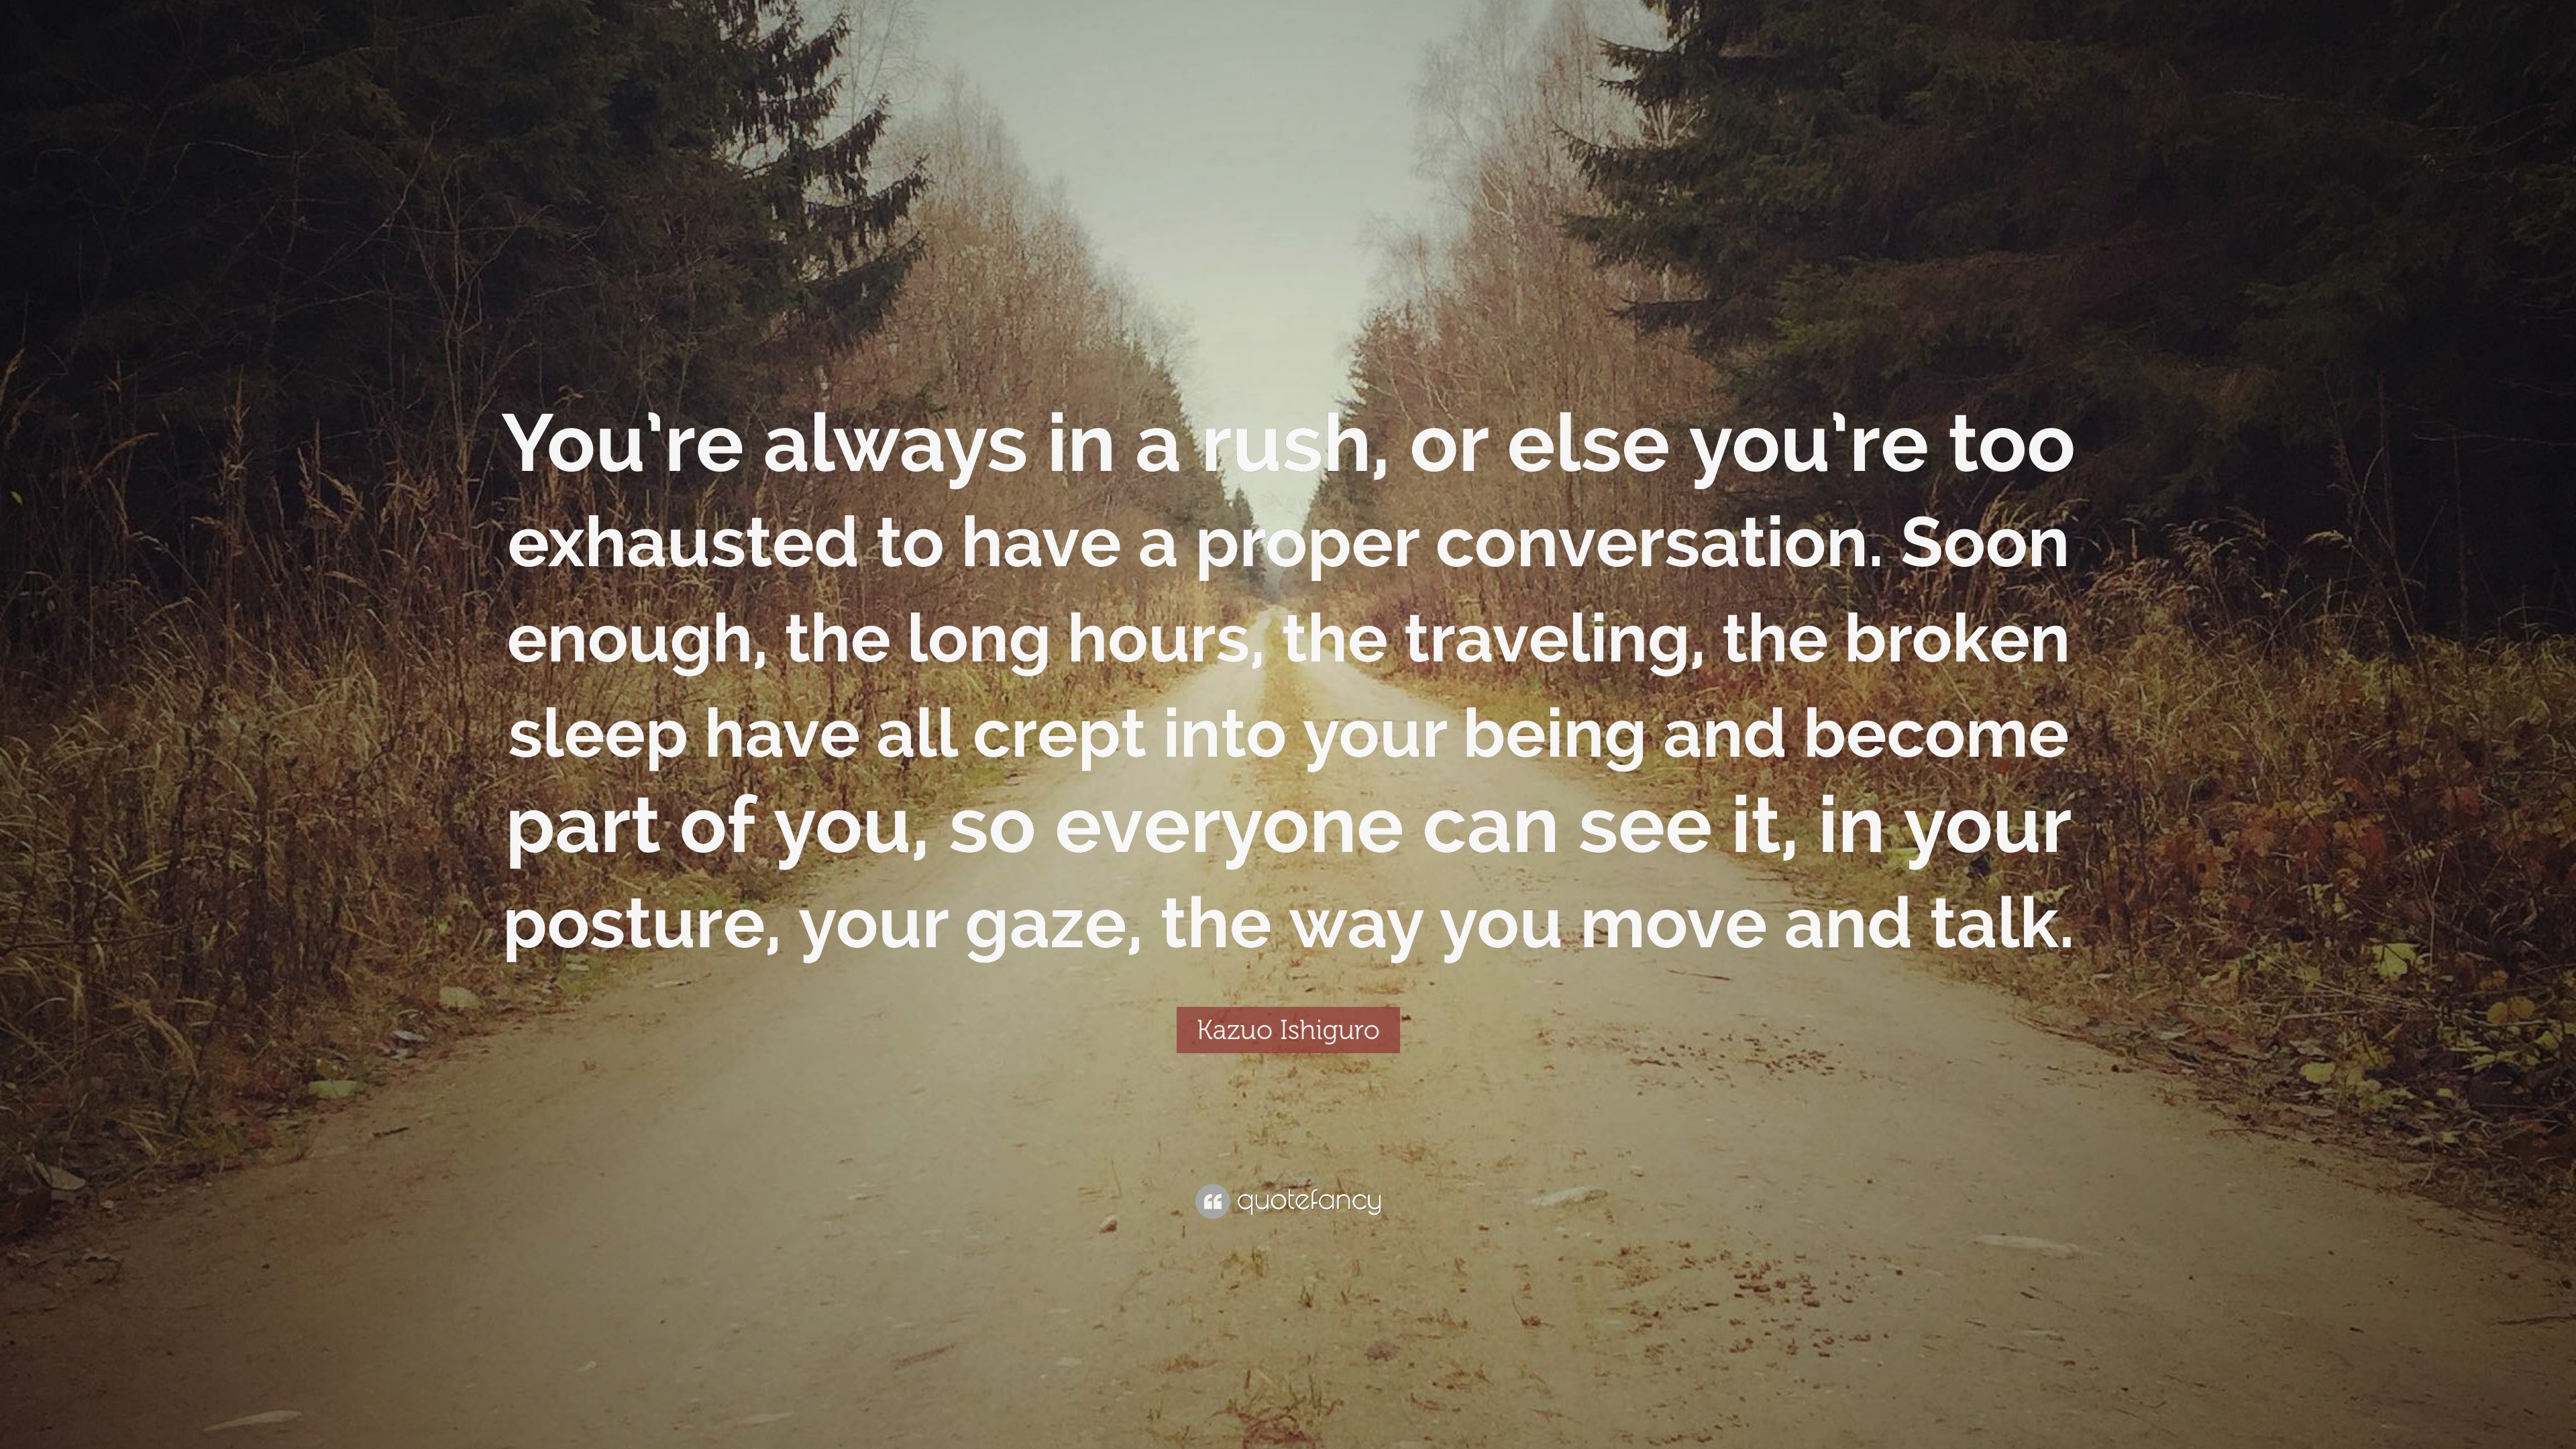 Kazuo Ishiguro Quote: “You’re always in a rush, or else you’re too ...